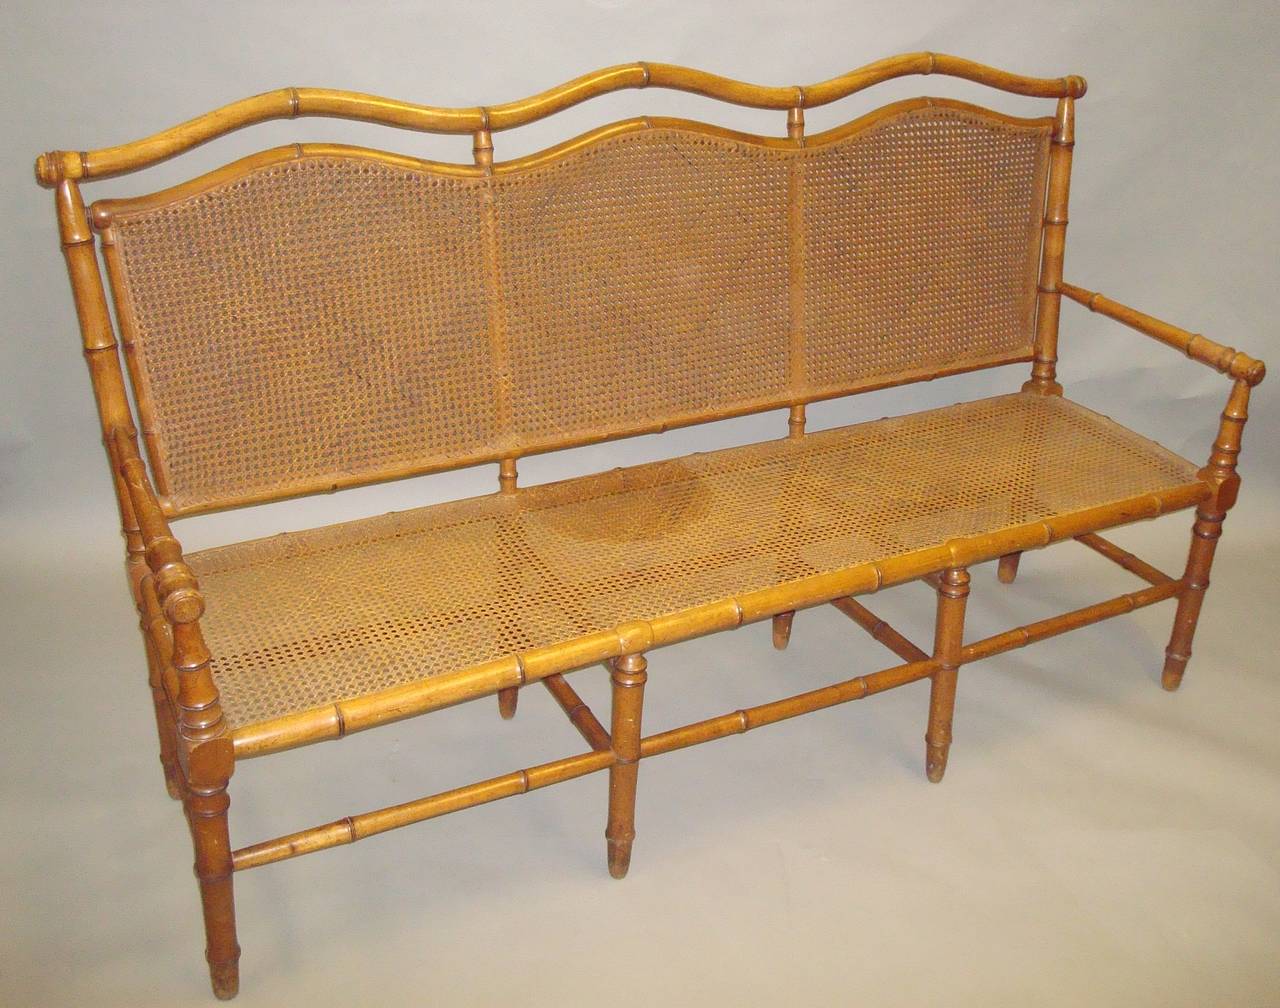 Stylish 19th Century Cherrywood Faux Bamboo Settee or Hall Seat In Good Condition For Sale In Moreton-in-Marsh, Gloucestershire